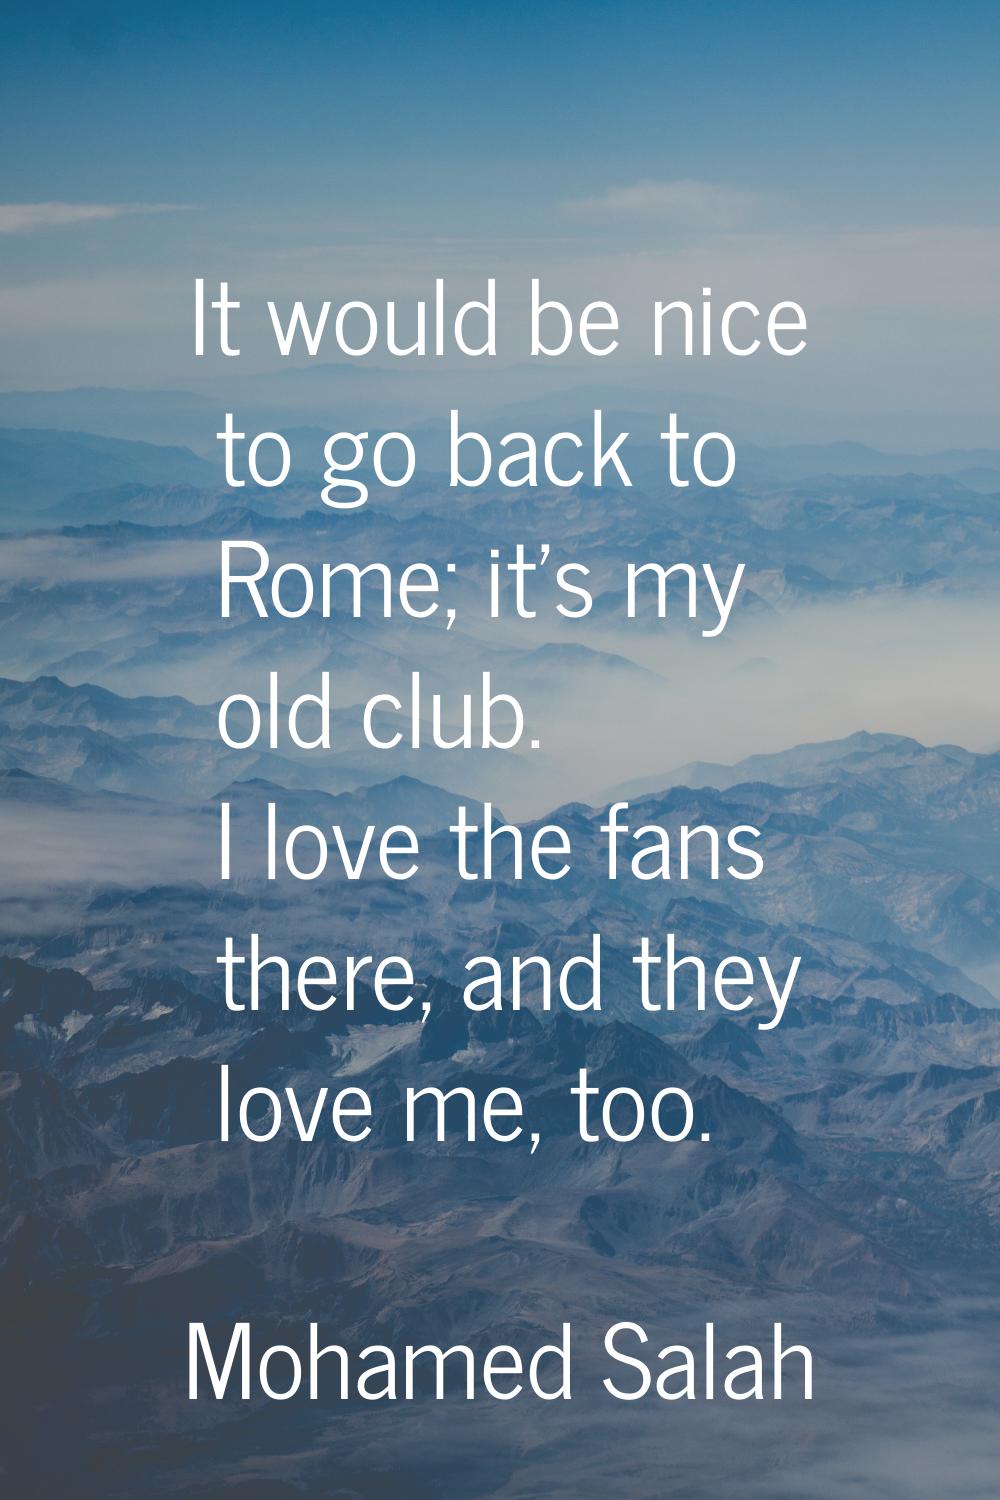 It would be nice to go back to Rome; it's my old club. I love the fans there, and they love me, too